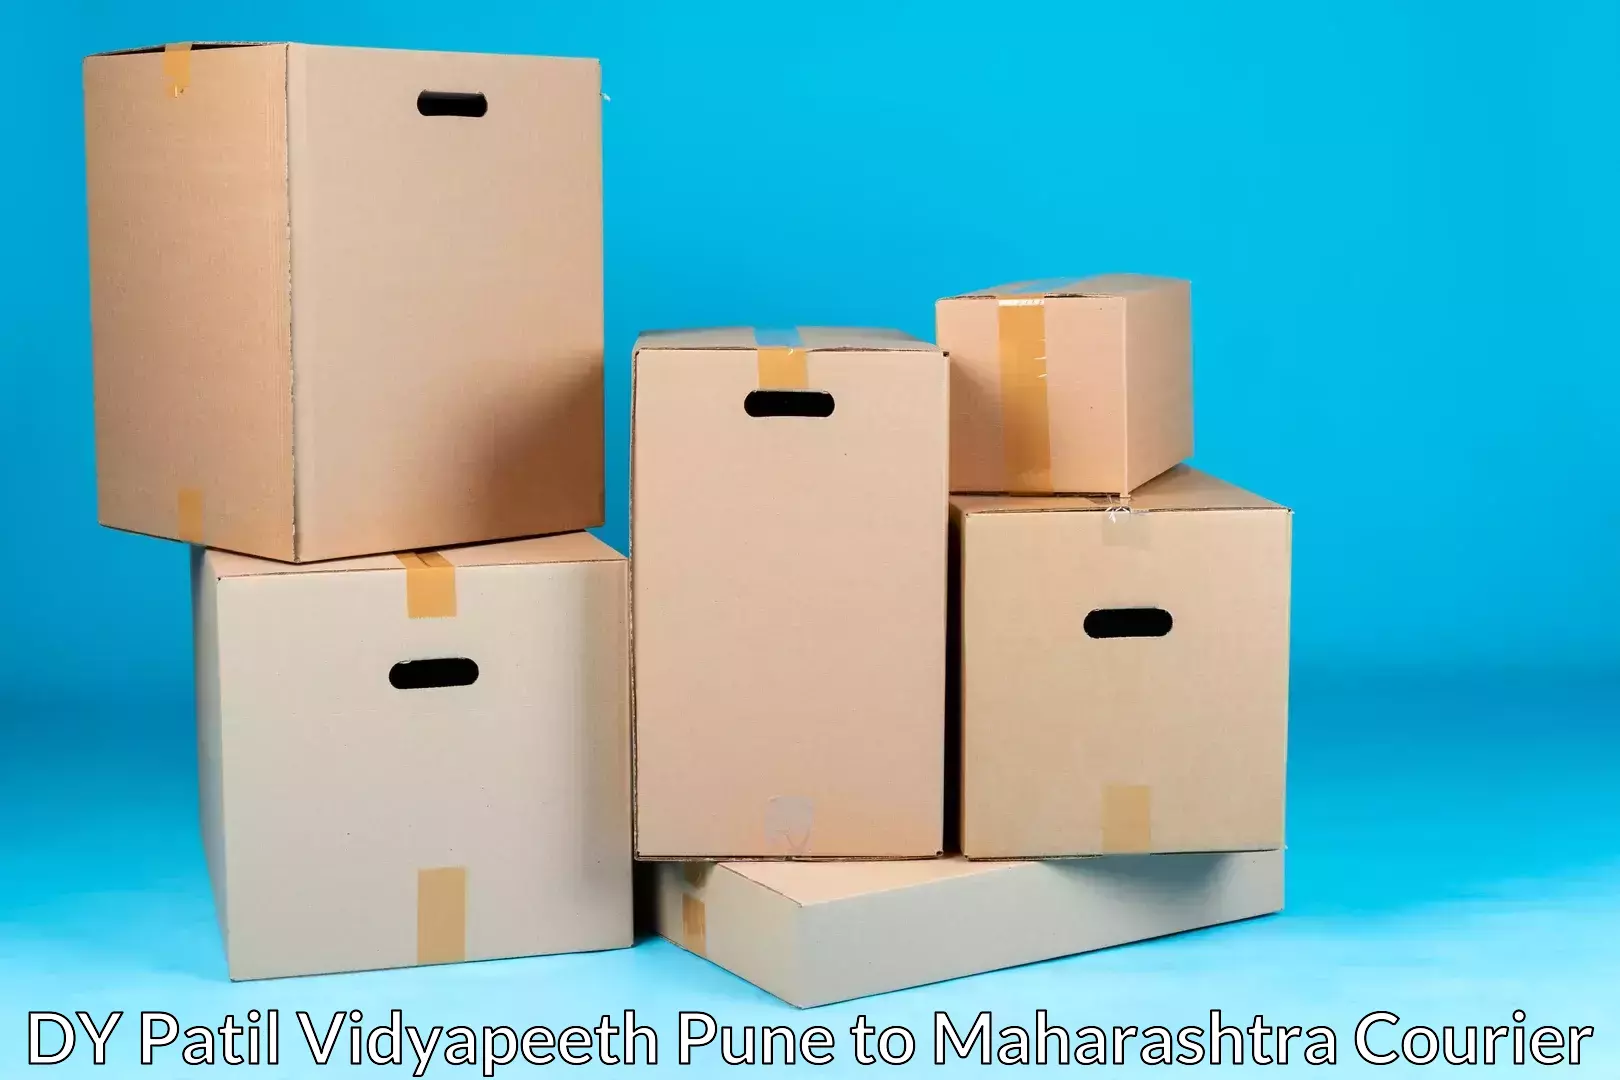 Home relocation experts DY Patil Vidyapeeth Pune to Muktainagar